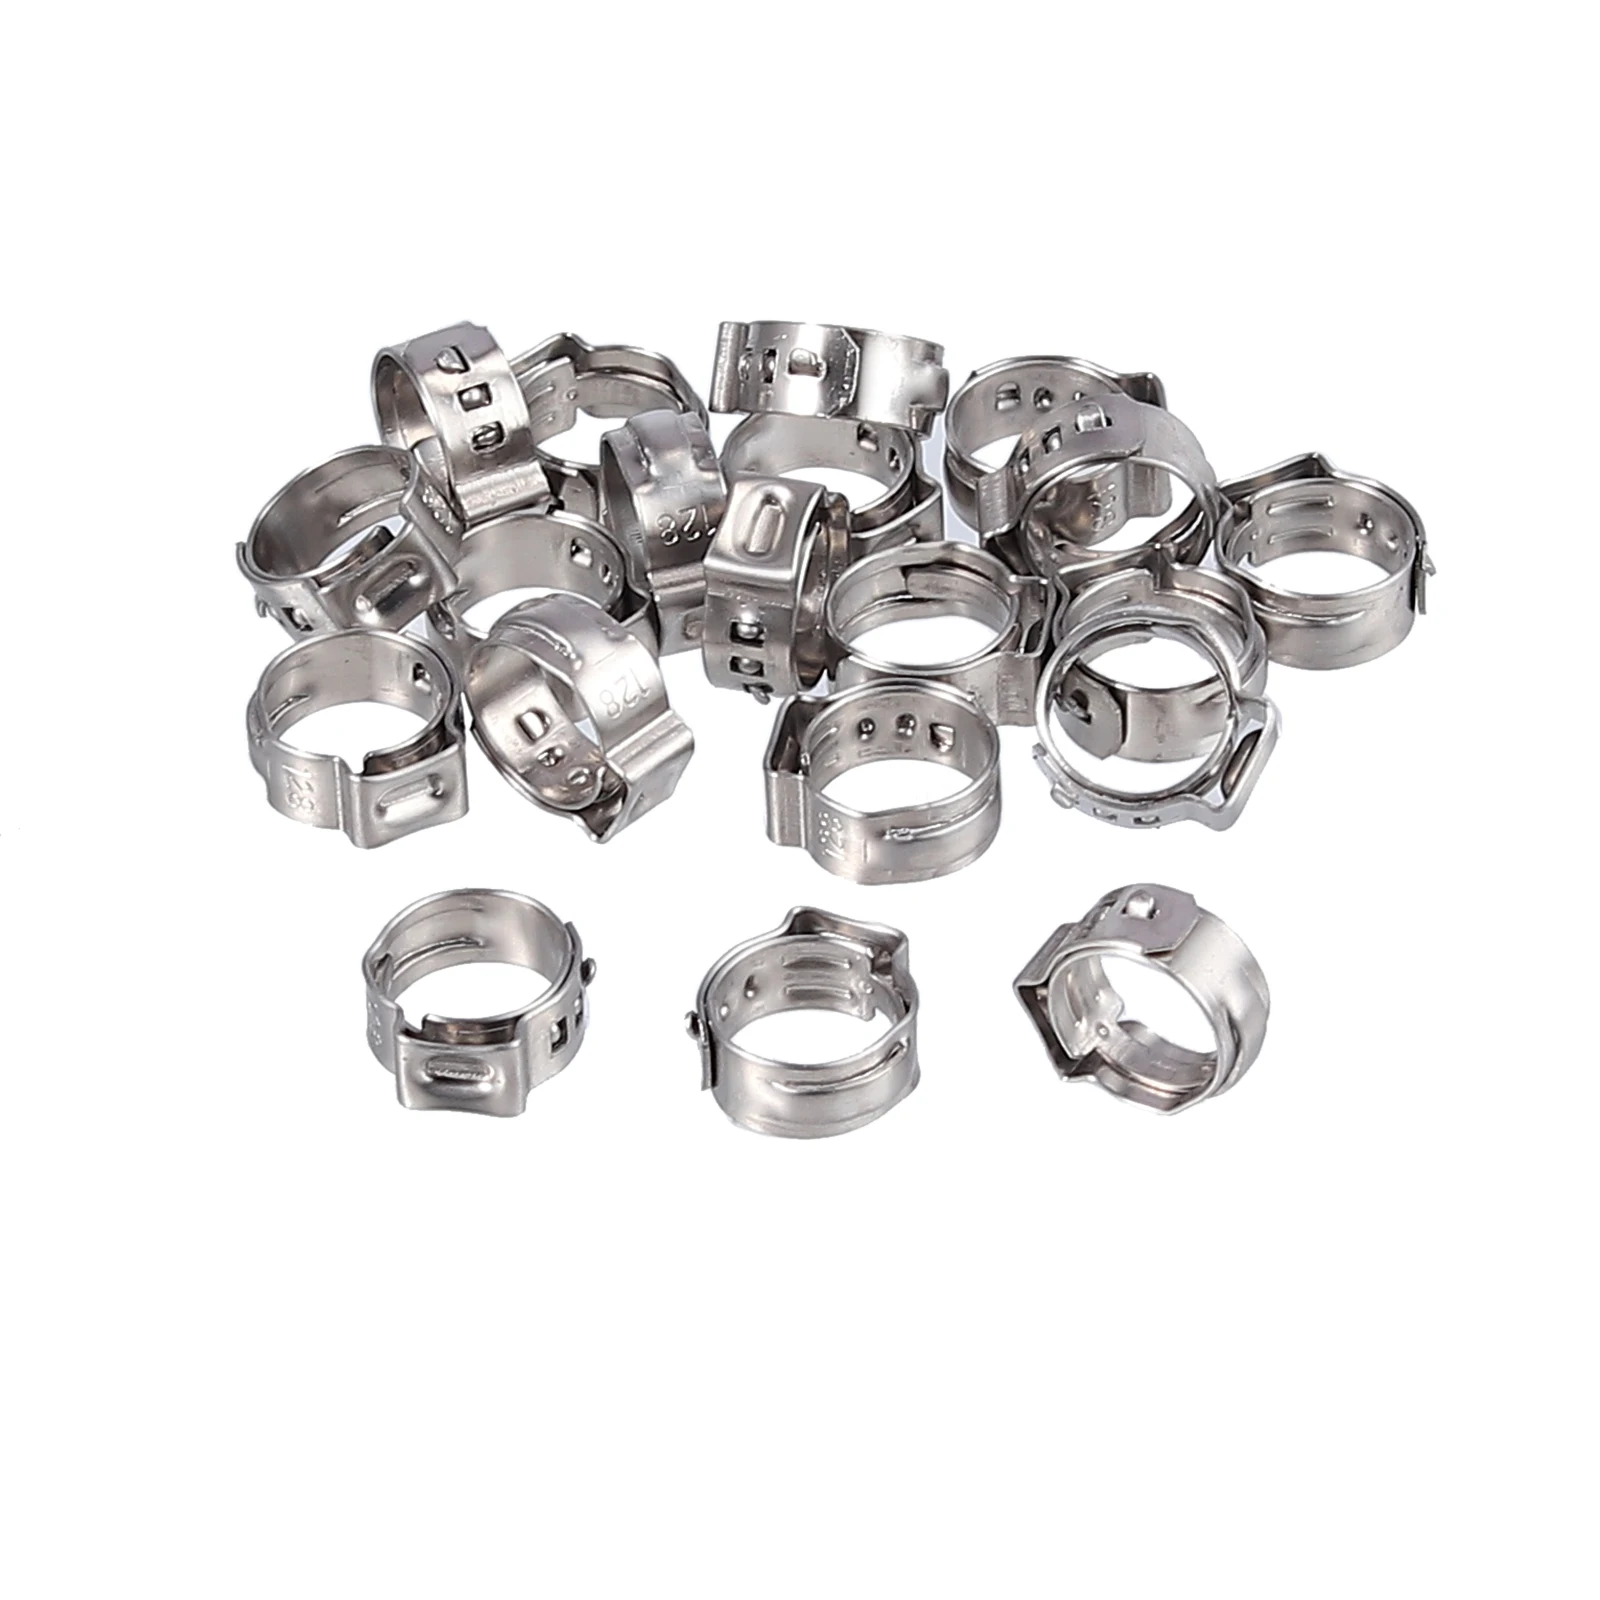 PROSTER 130Pcs Stainless Steel Single Ear Stepless Hose Clamps Assortment Rings 